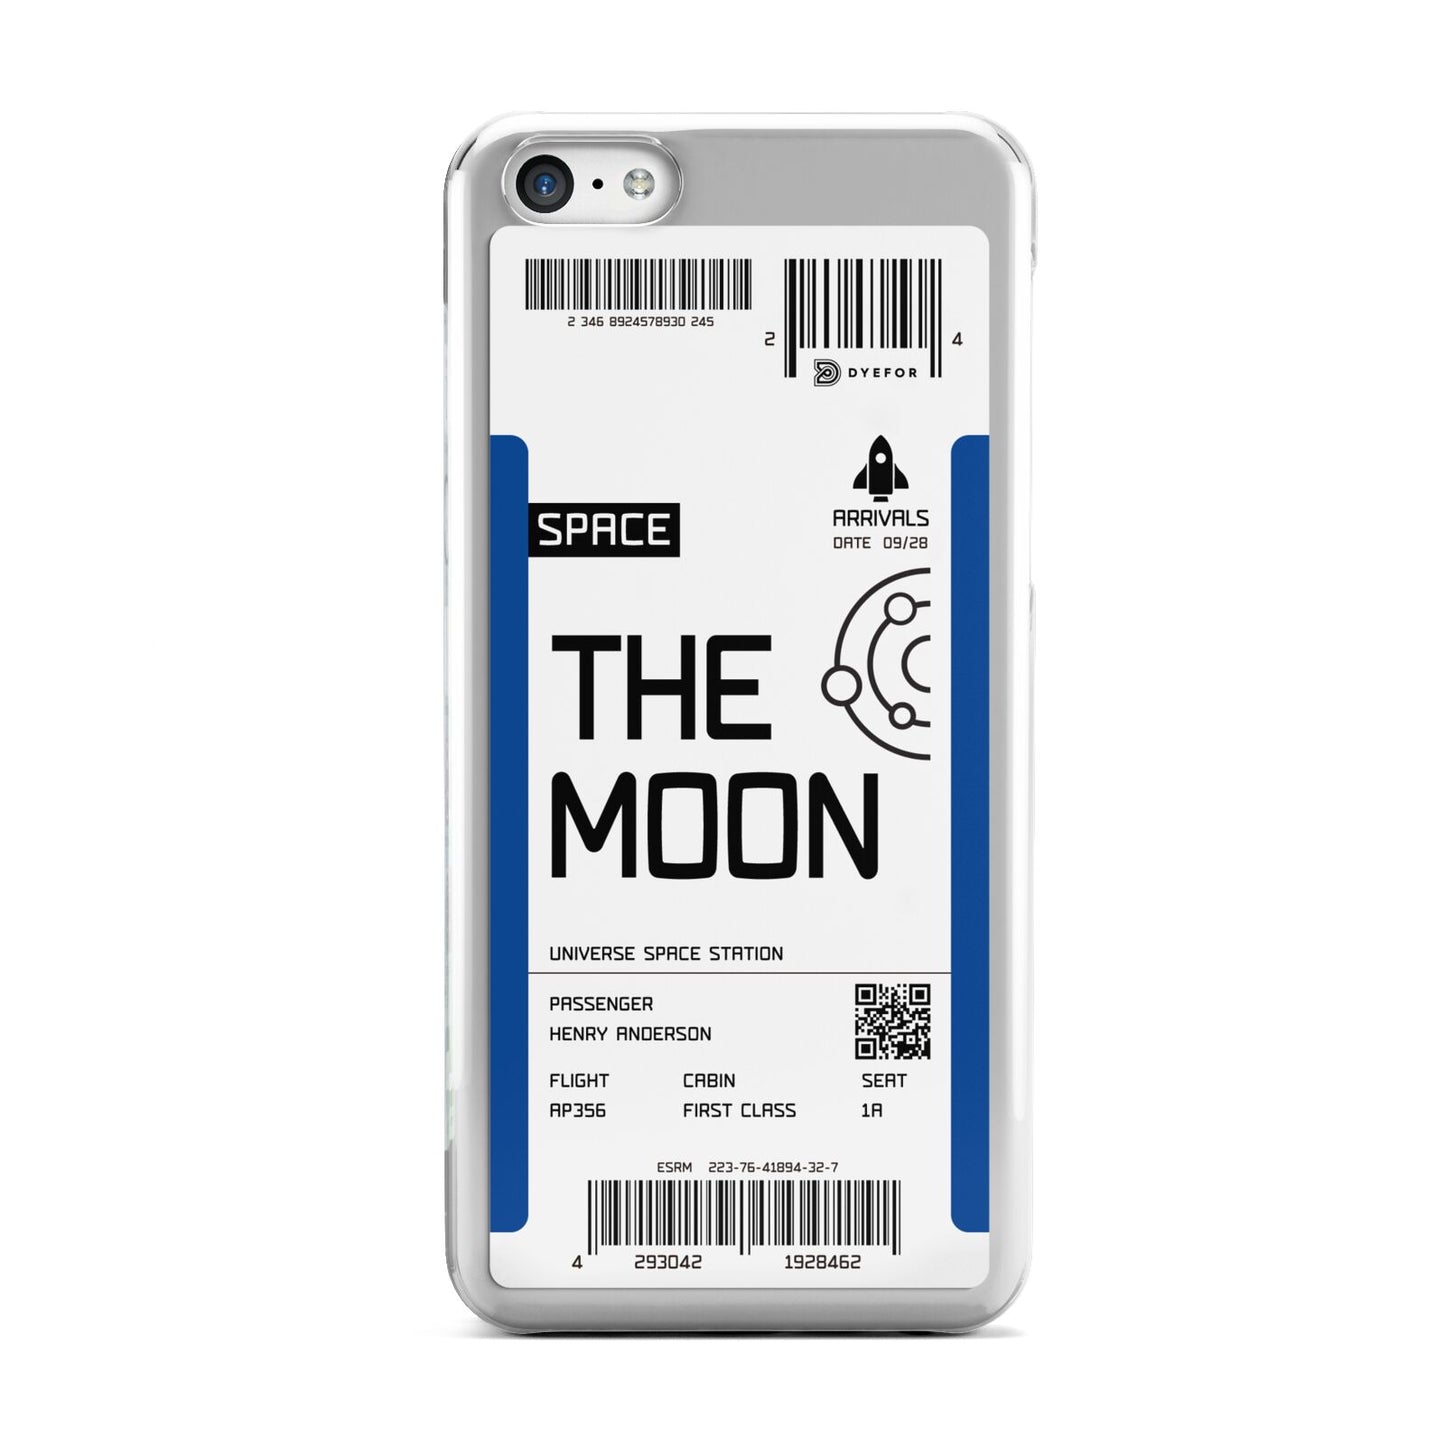 The Moon Boarding Pass Apple iPhone 5c Case